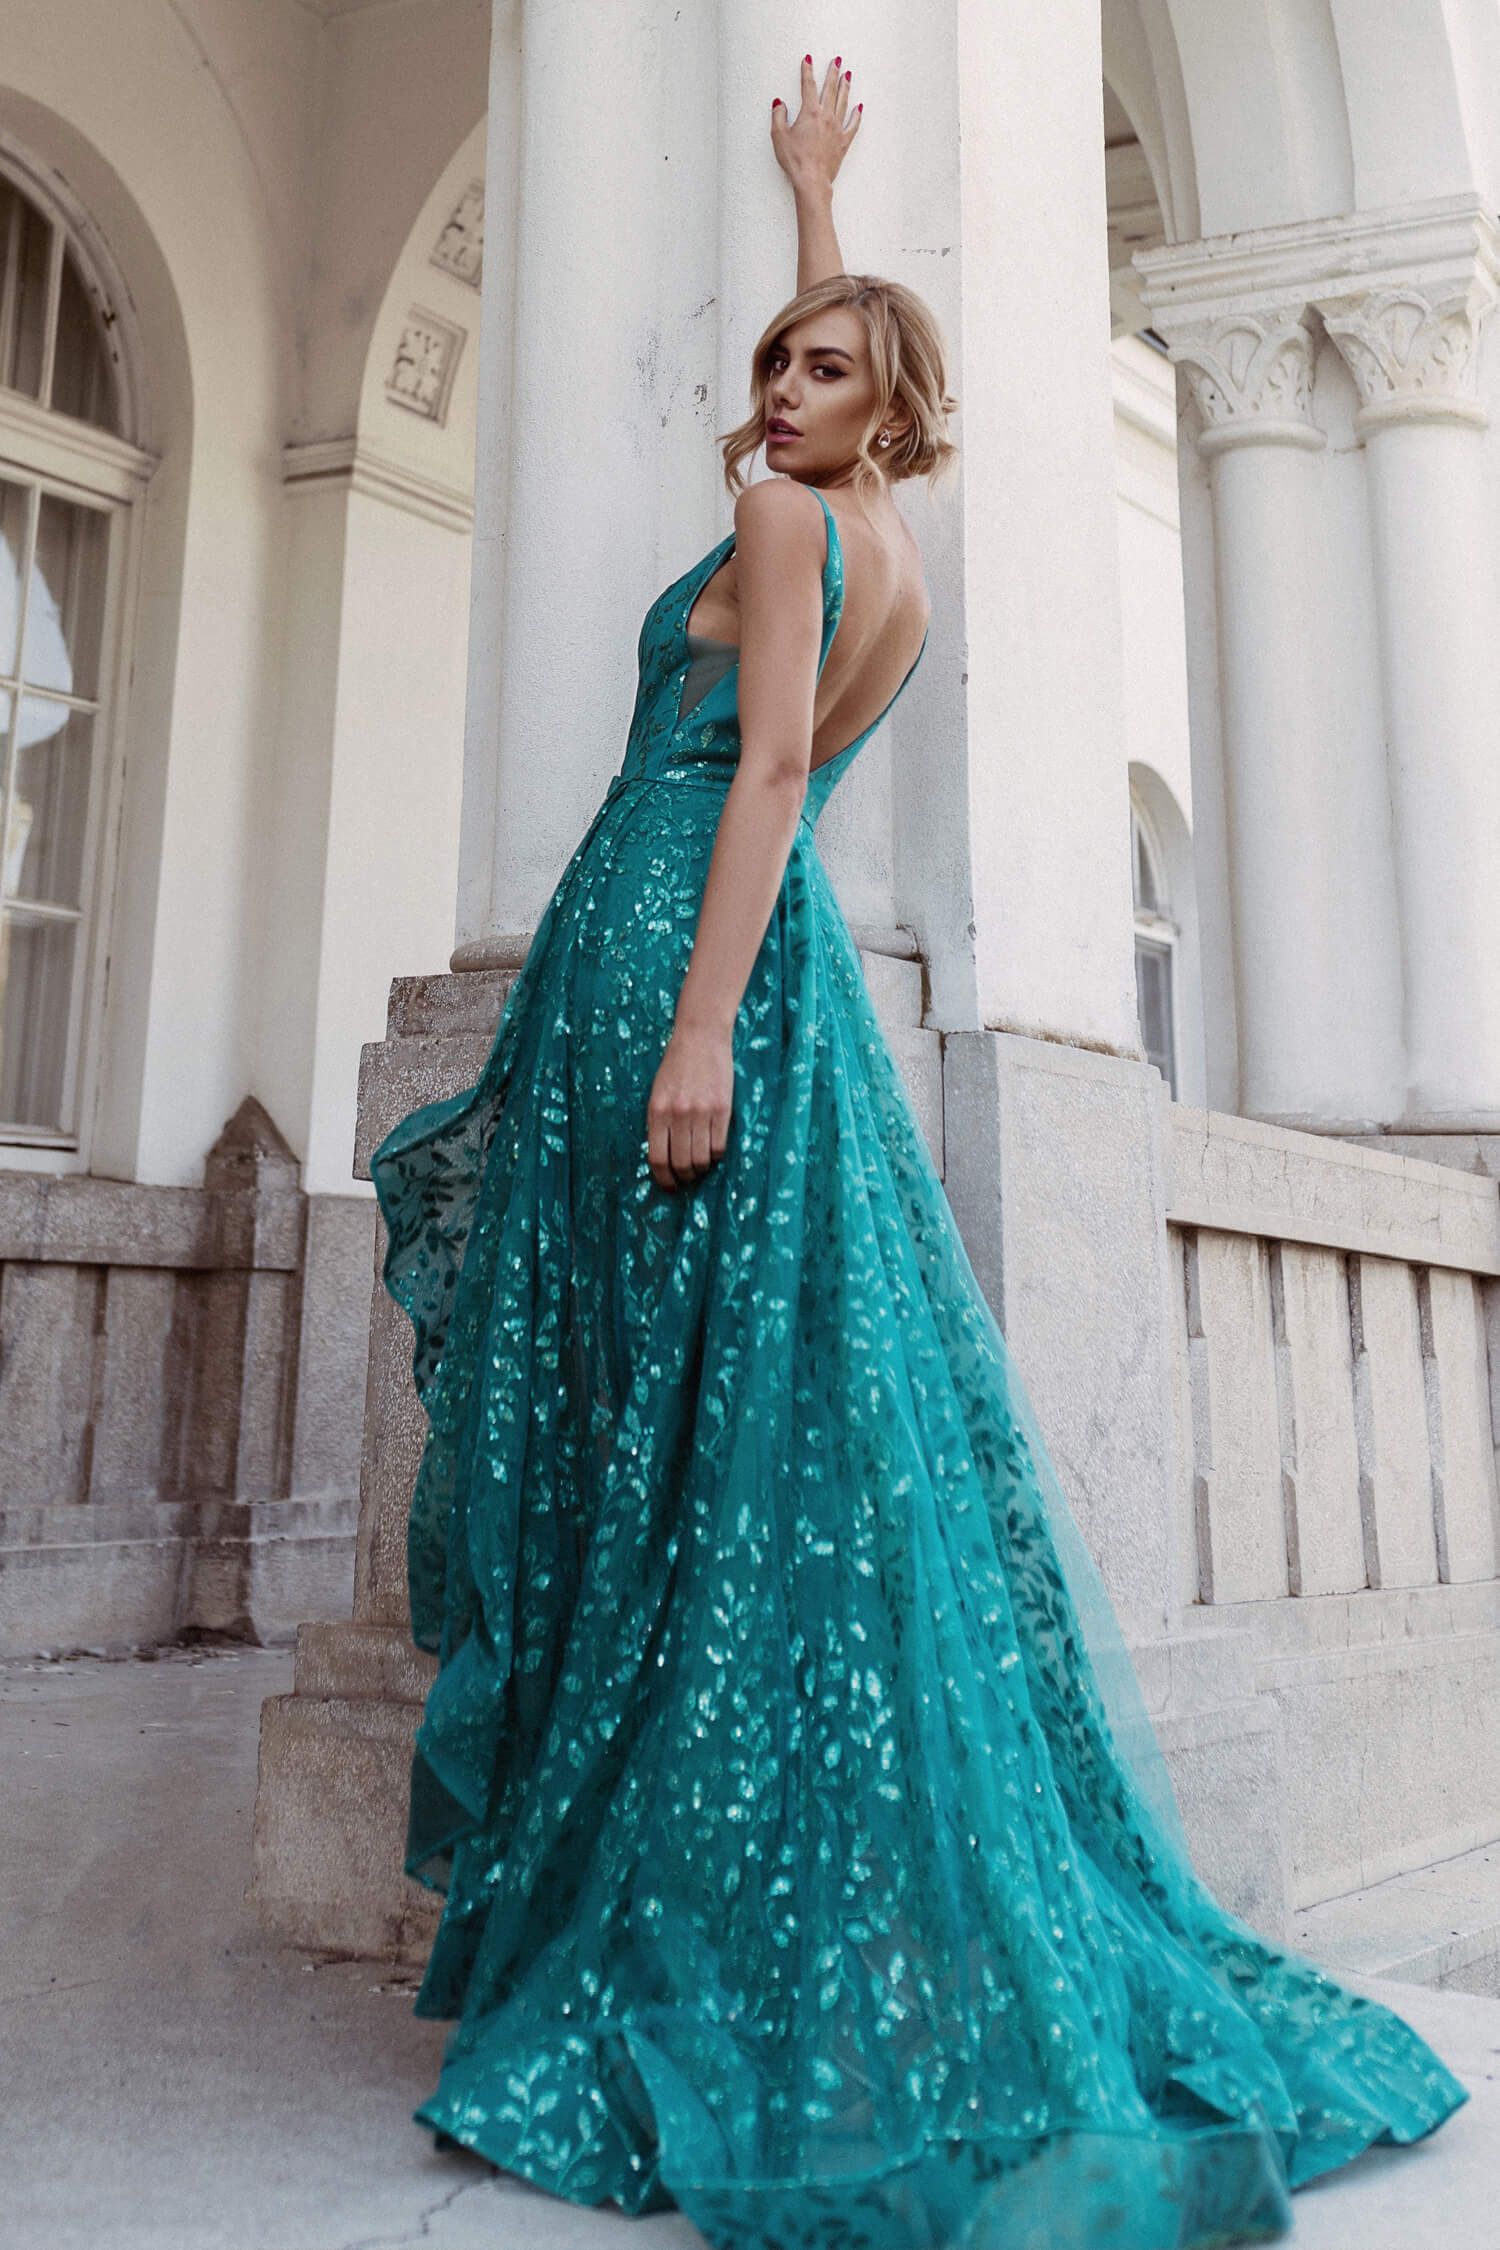 Turquoise Short and Long Formal Dresses, Custom Prom Dresses - STACEES